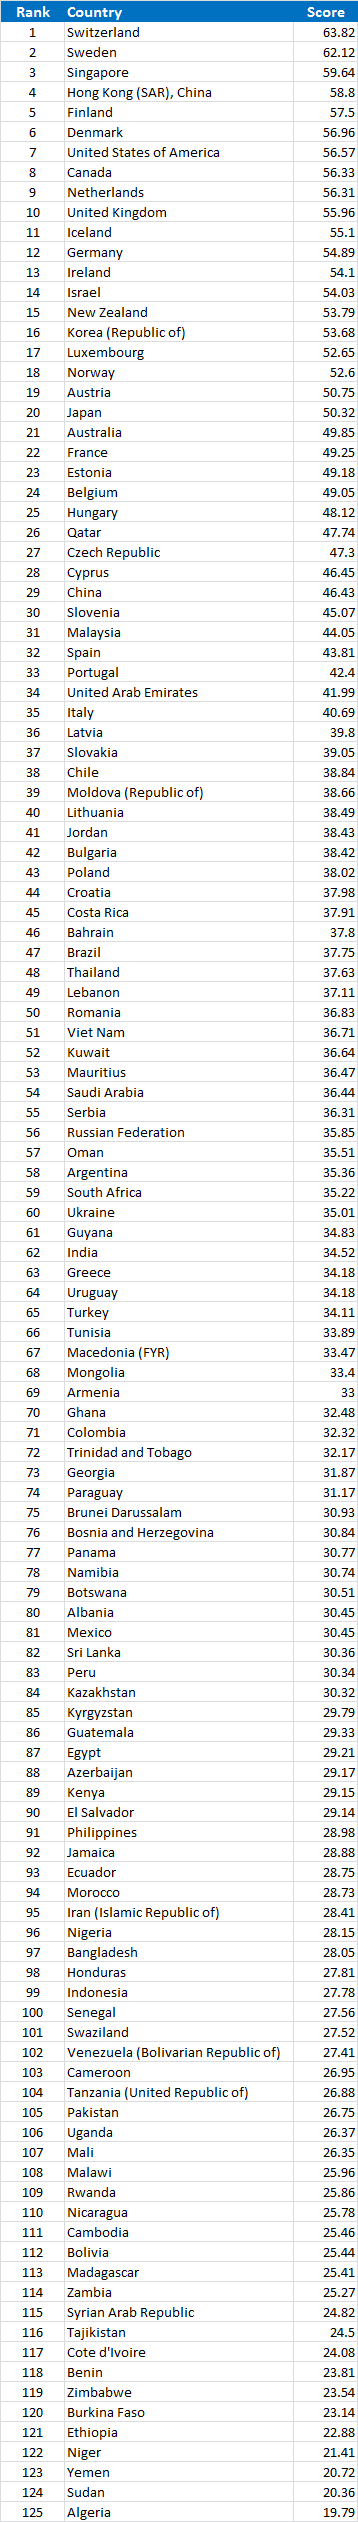 Global Innovation Index 2011 Country Rankings